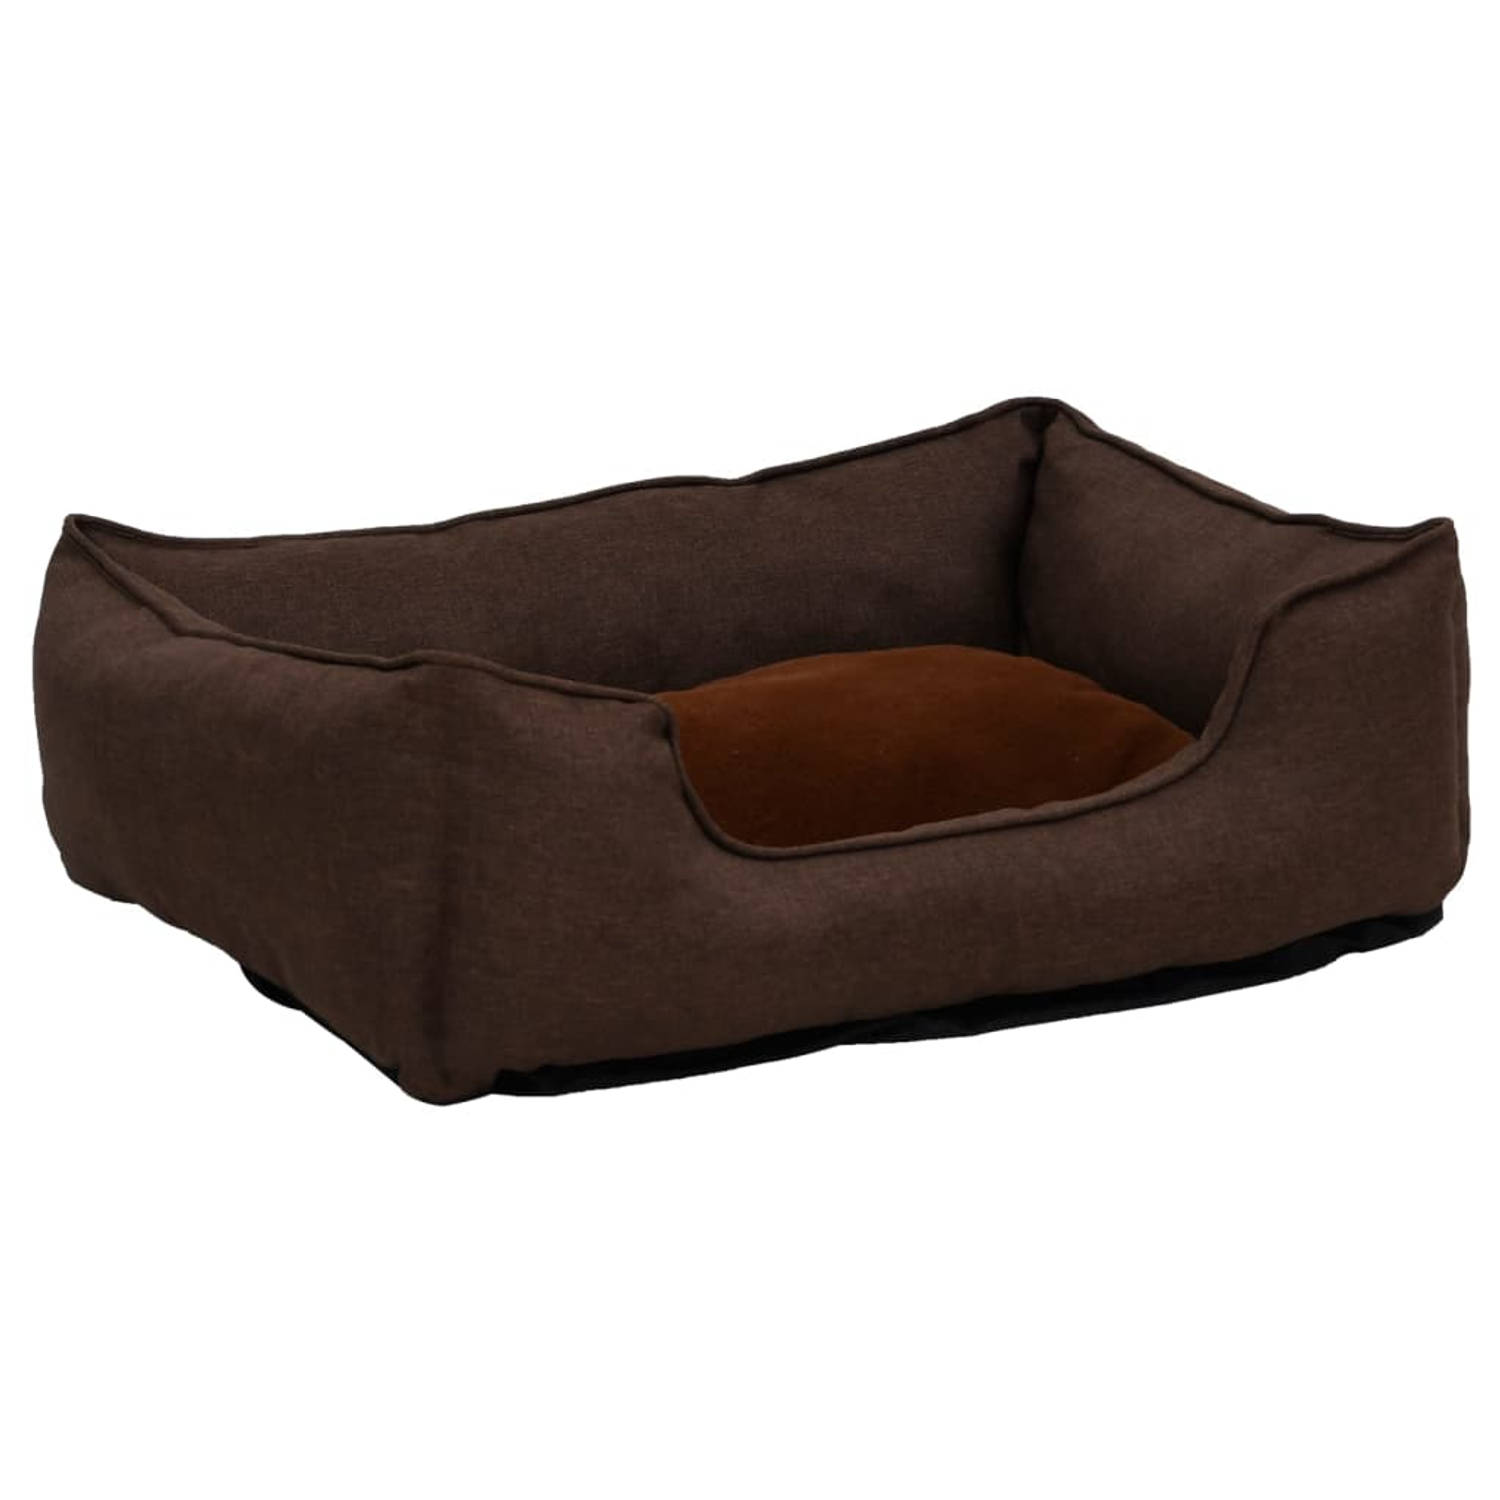 The Living Store Hondenmand - Huisdierenbed - 85.5 x 70 x 23 cm - Bruin